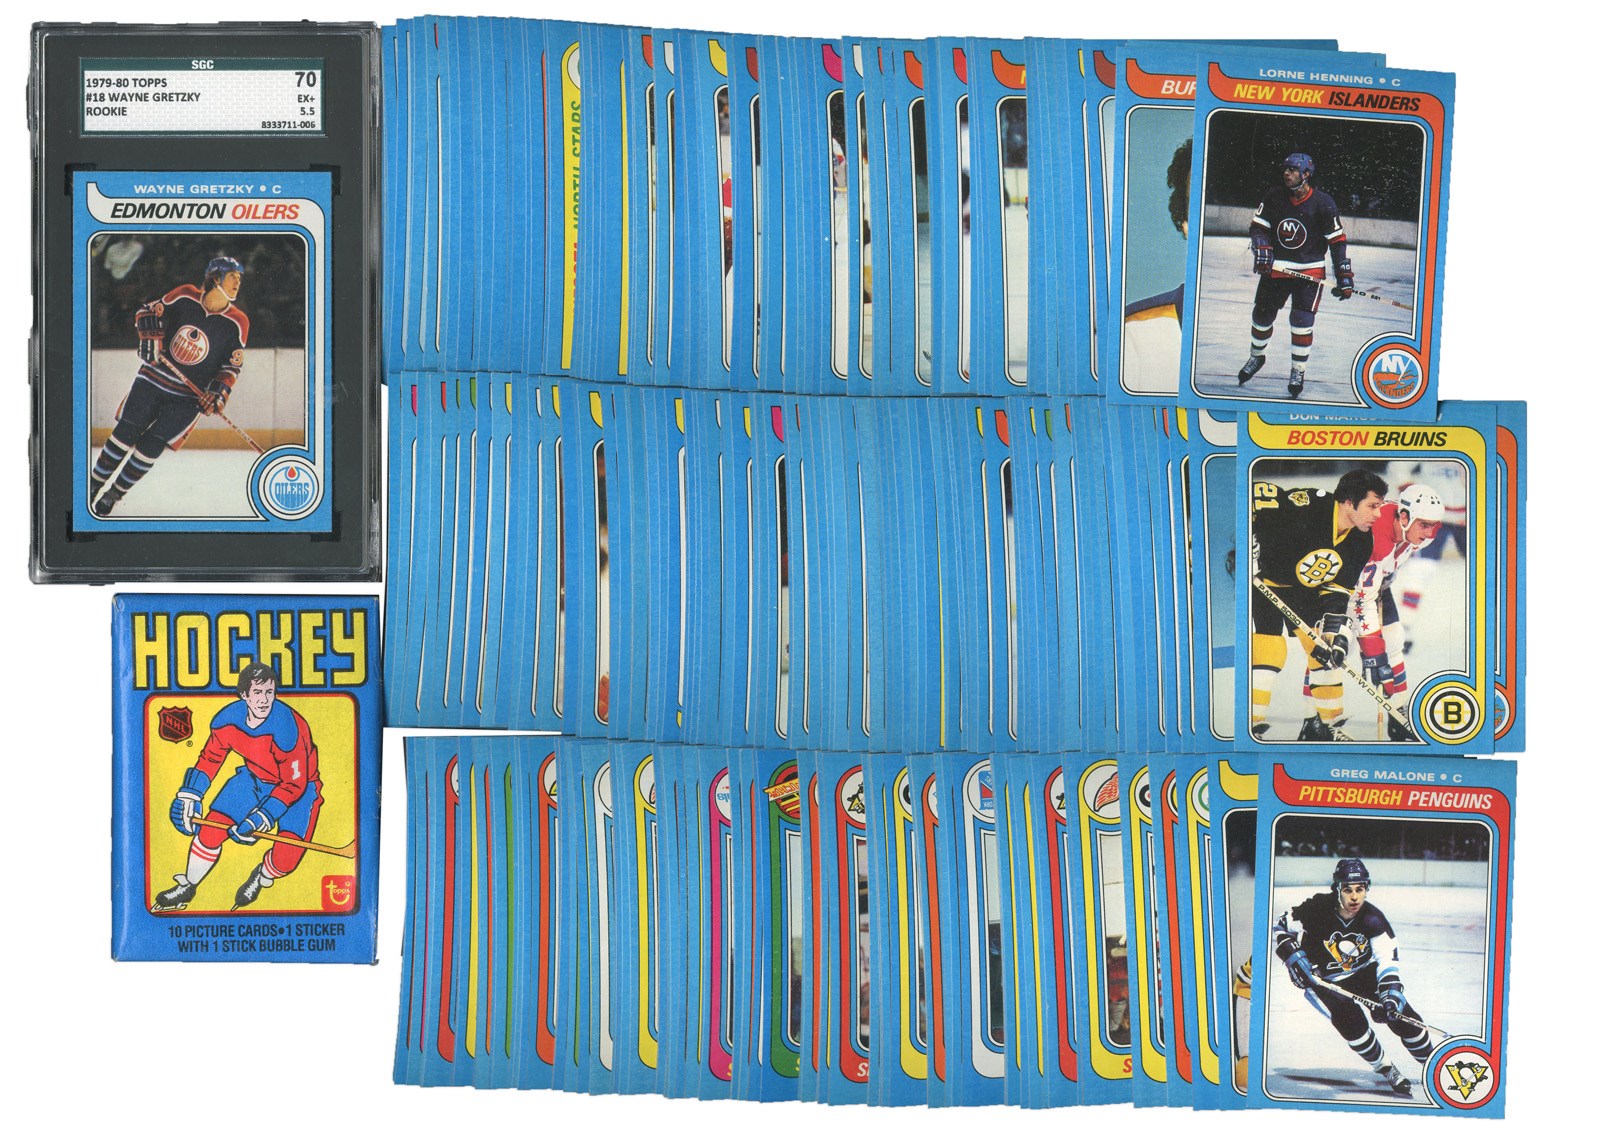 - 1979 Topps Hockey Complete Set with Sealed Pack & SGC 70 Gretzky Rookie